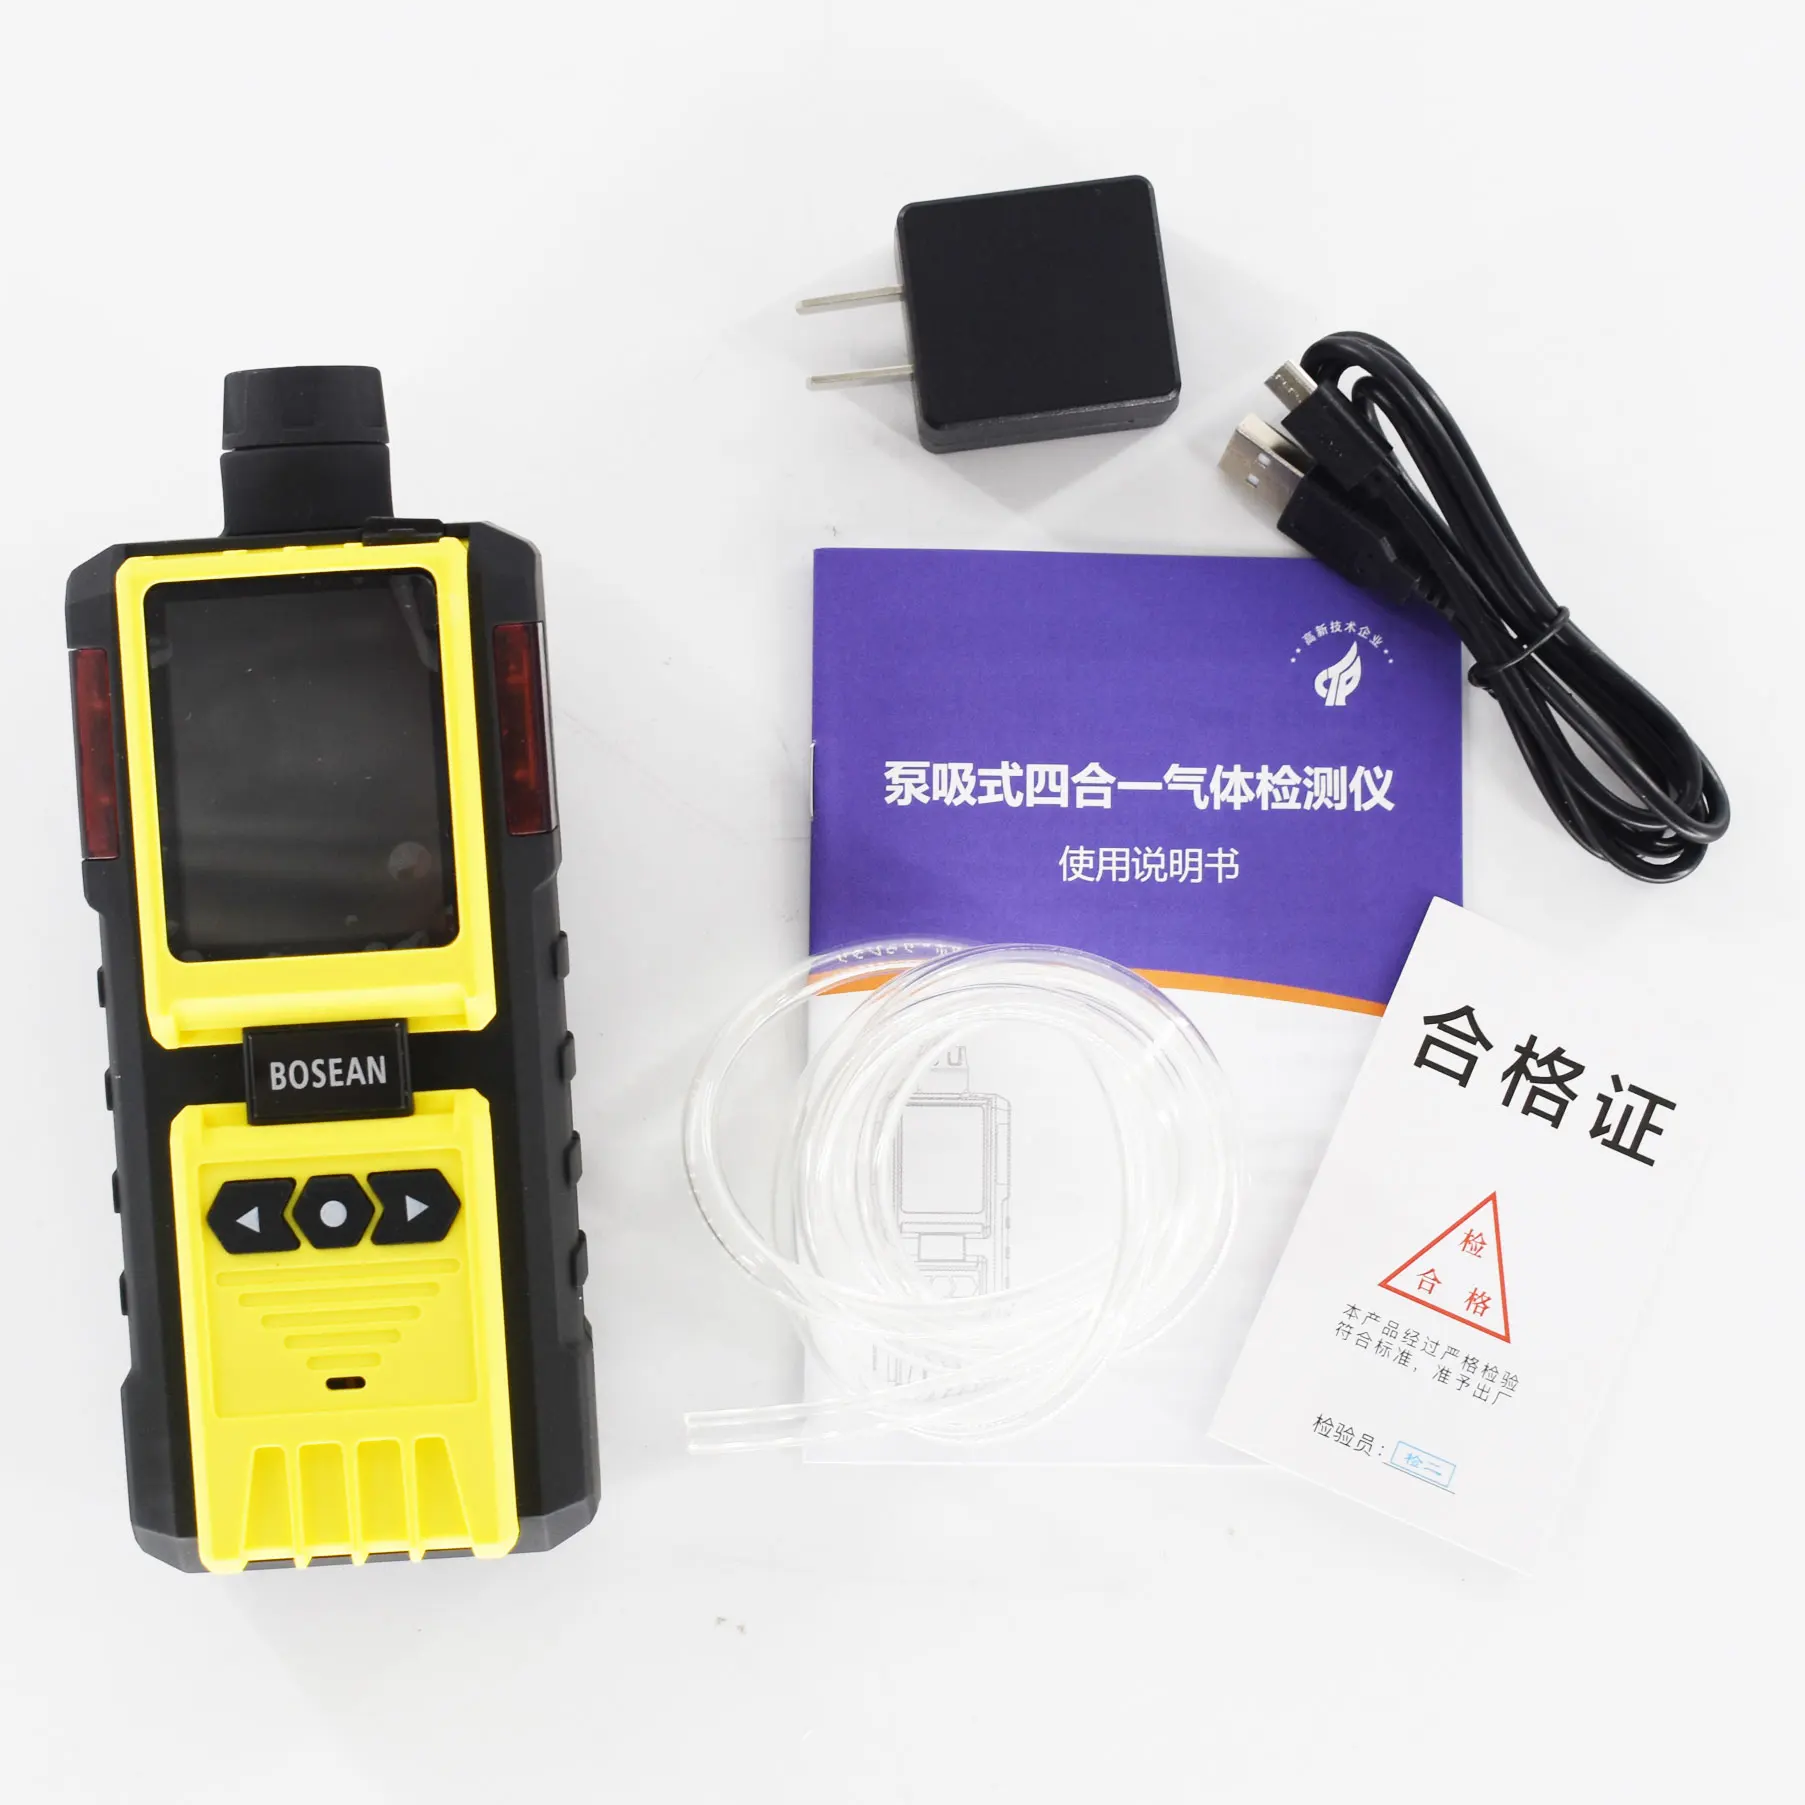 

K-600 CO2 NH3 O2 H2S Gas Detector built-in pump Tester Portable 4 in 1 Carbon dioxide ammonia oxygen hydrogen sulfide Detector